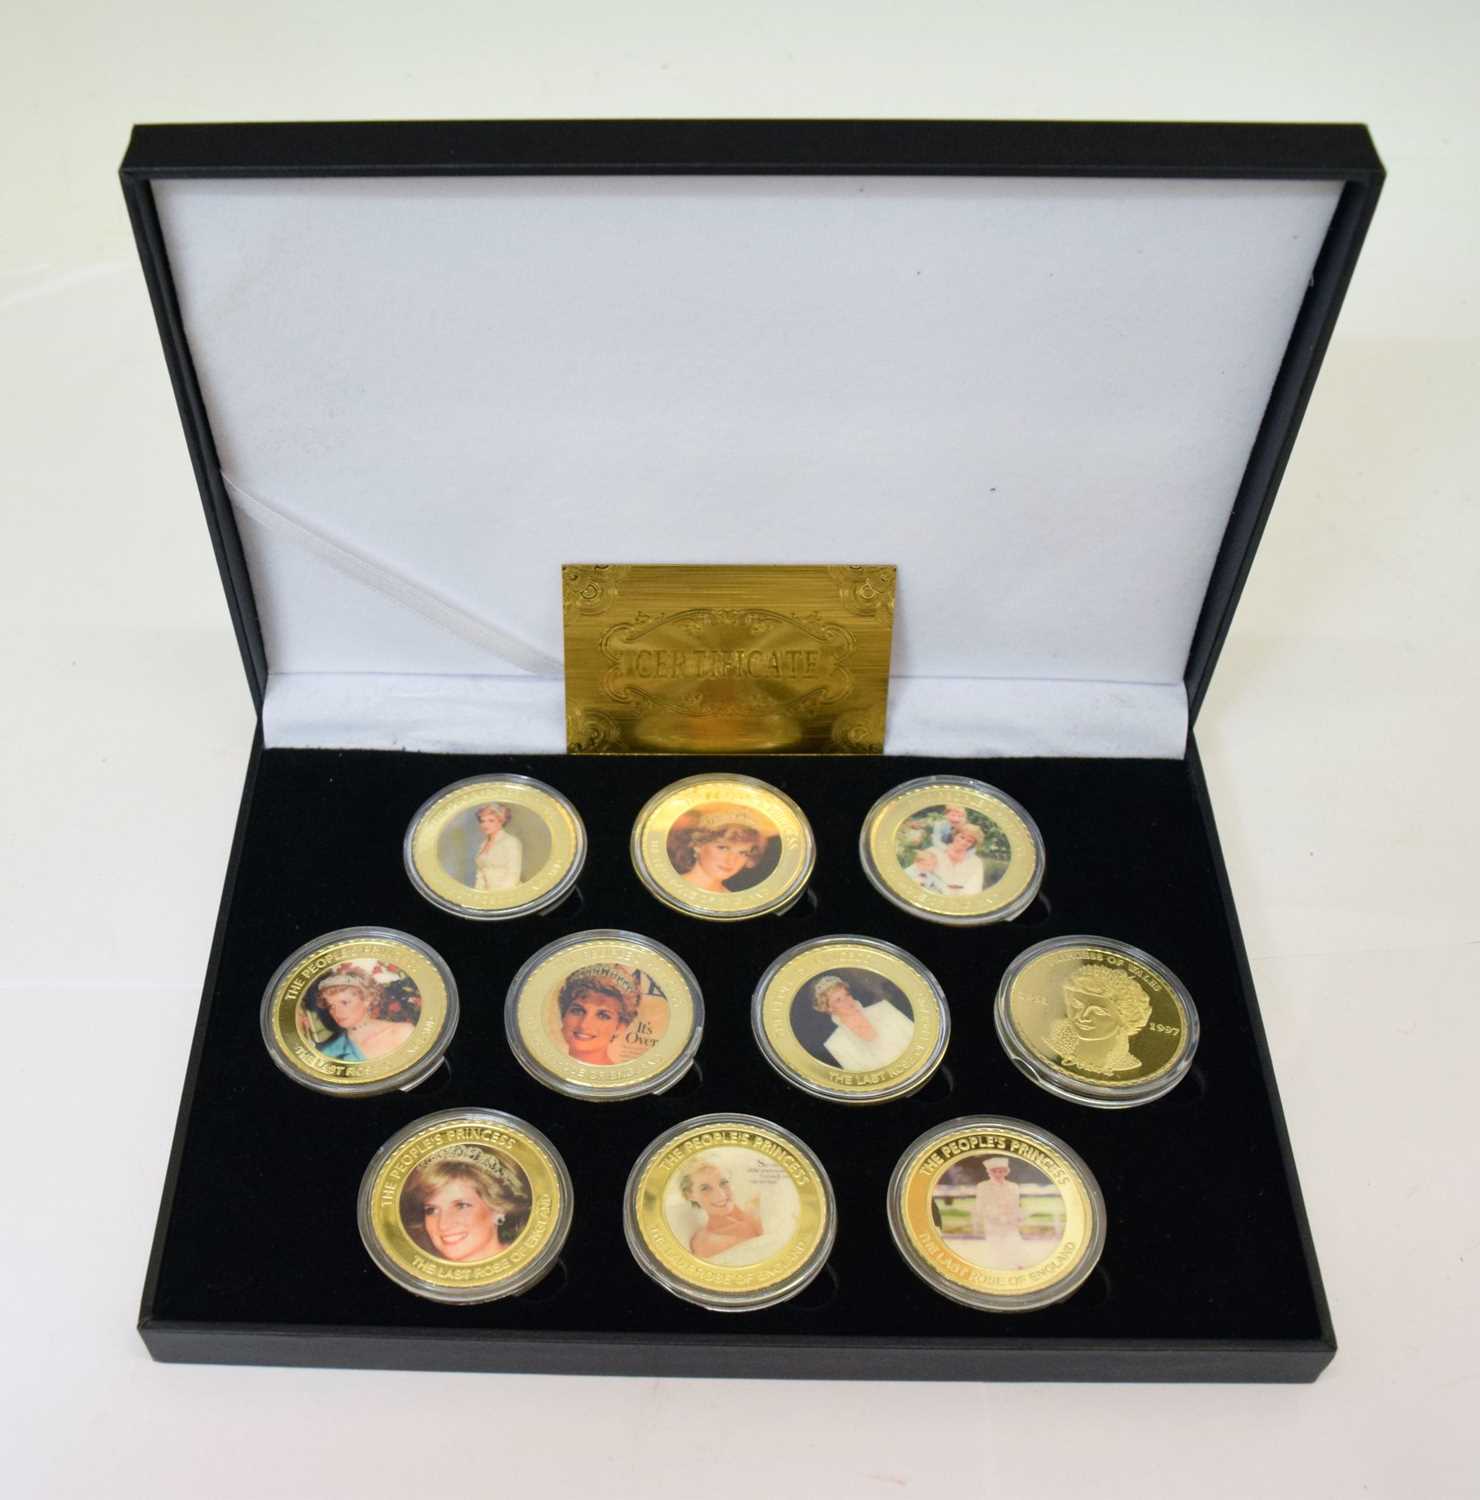 Gold plated limited edition ten coin set commemorating the life of Princess of Wales